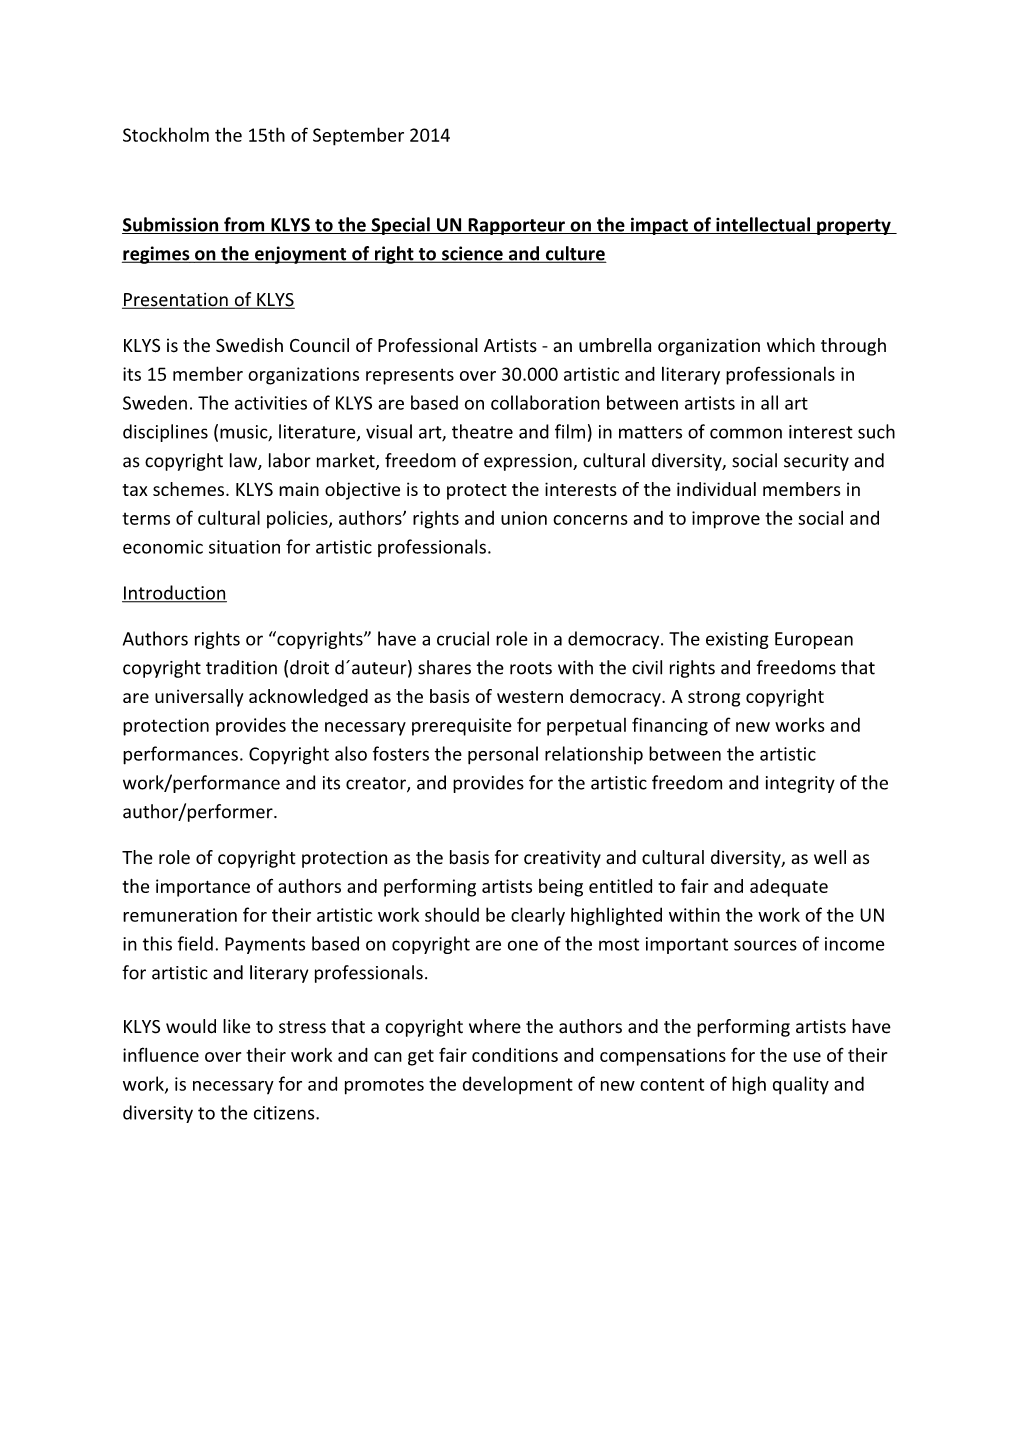 Submission from KLYS to the Special UN Rapporteur on the Impact of Intellectual Property